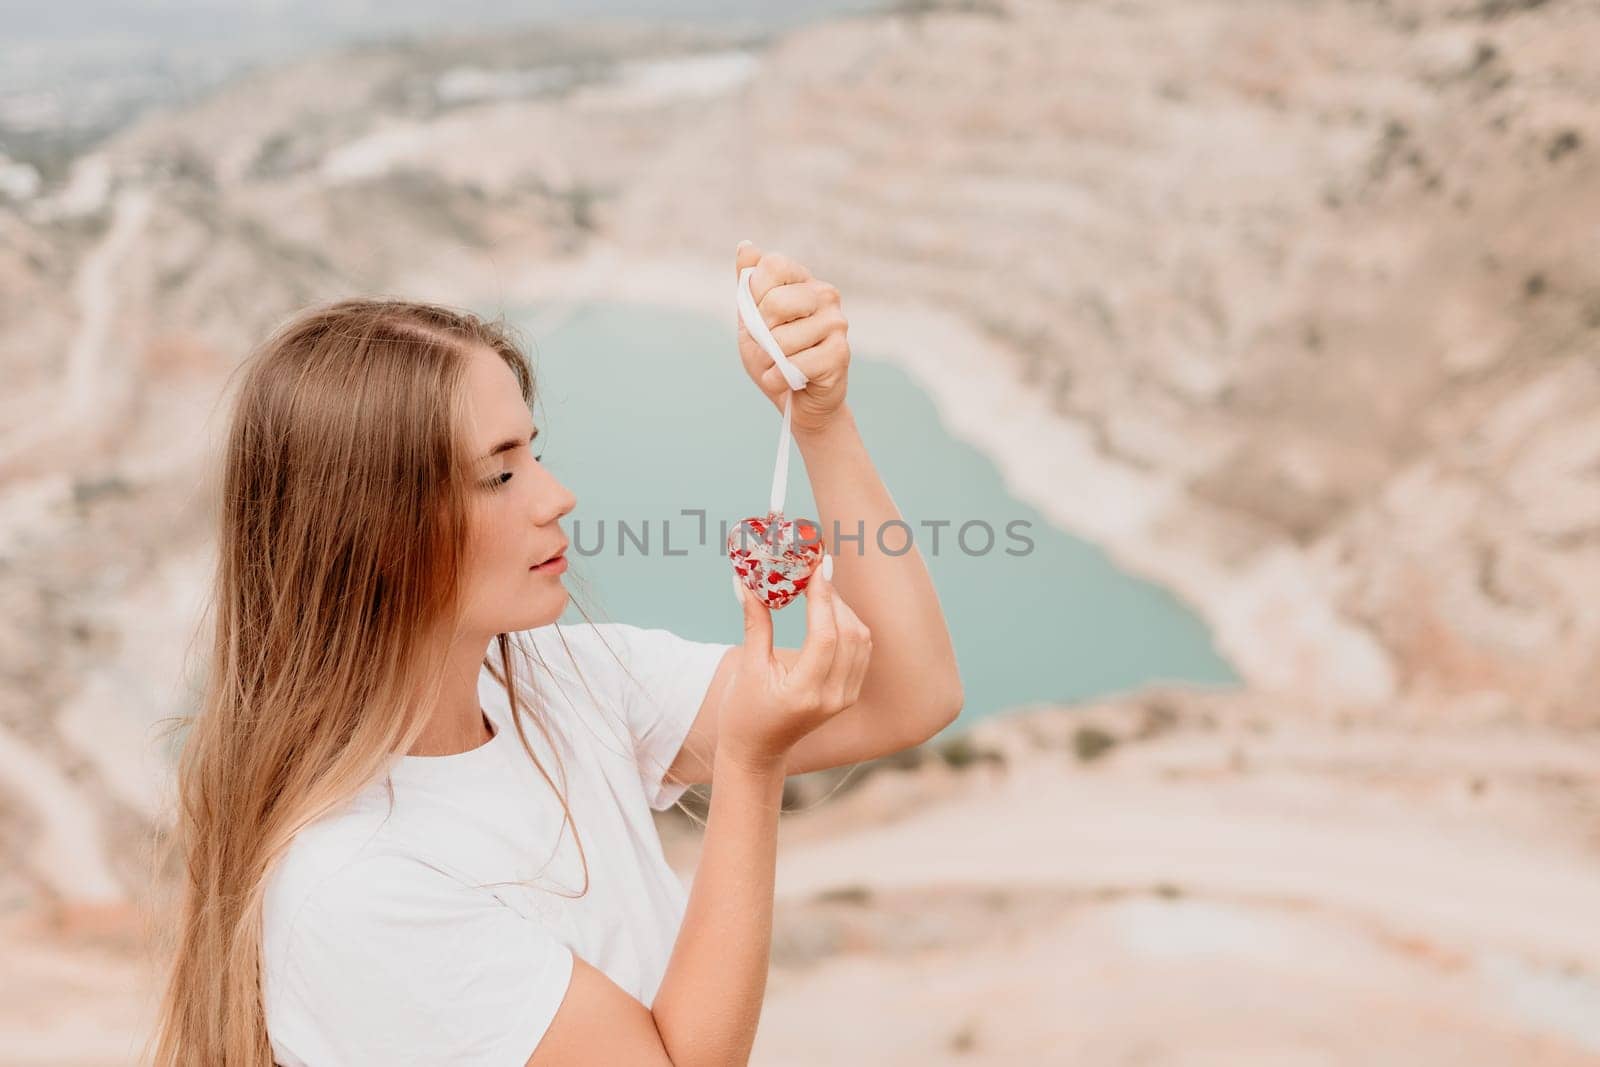 Woman travel portrait. Happy woman with long hair looking at camera and smiling. Close up portrait cute woman is posing on a heart shaped lake - travel destination by panophotograph